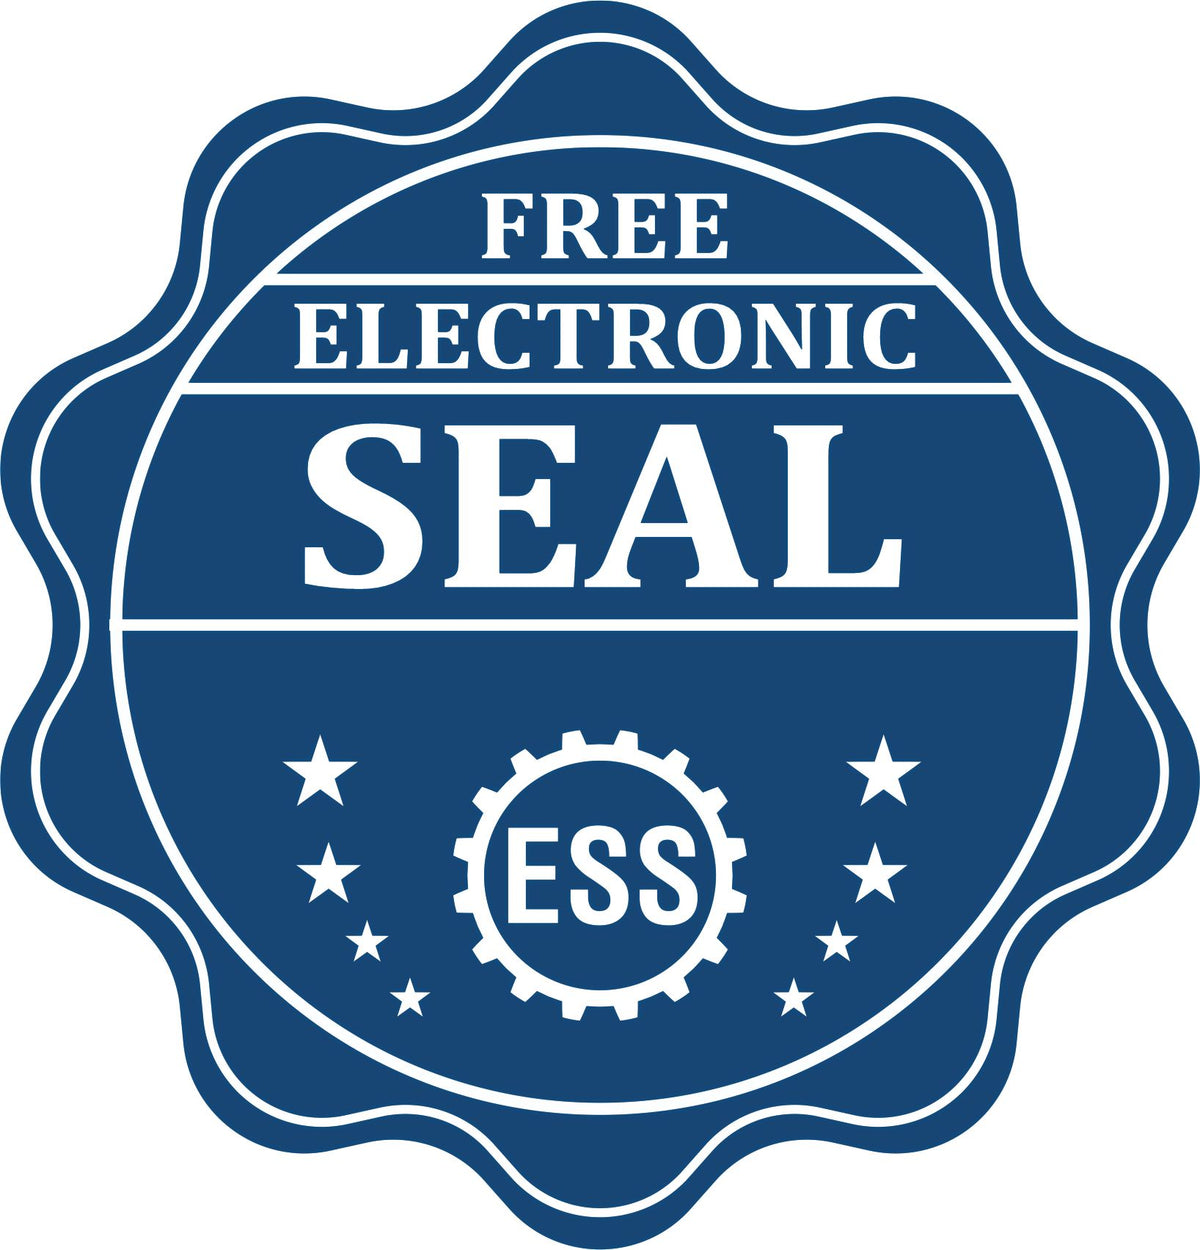 A badge showing a free electronic seal for the PSI Michigan Notary Stamp with stars and the ESS gear on the emblem.